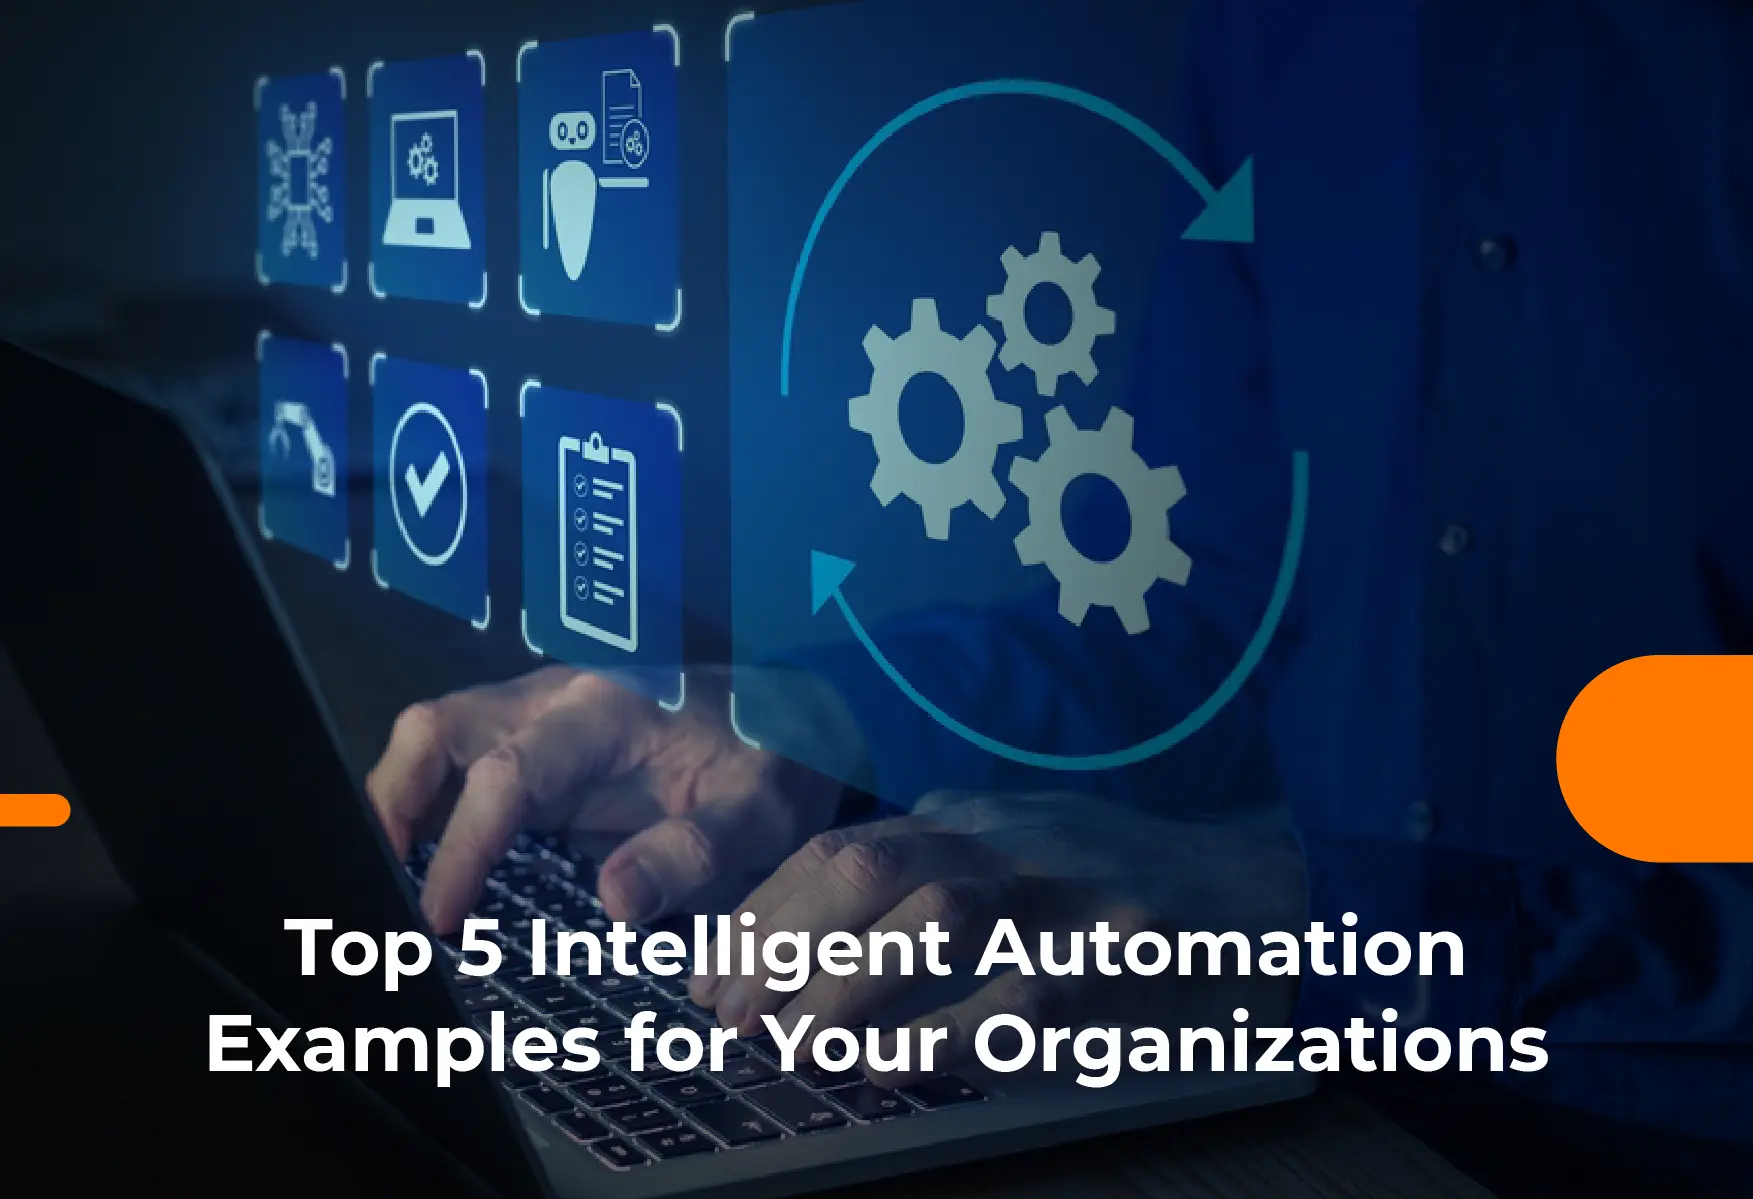 Top 5 Intelligent Automation Examples for Your Organizations